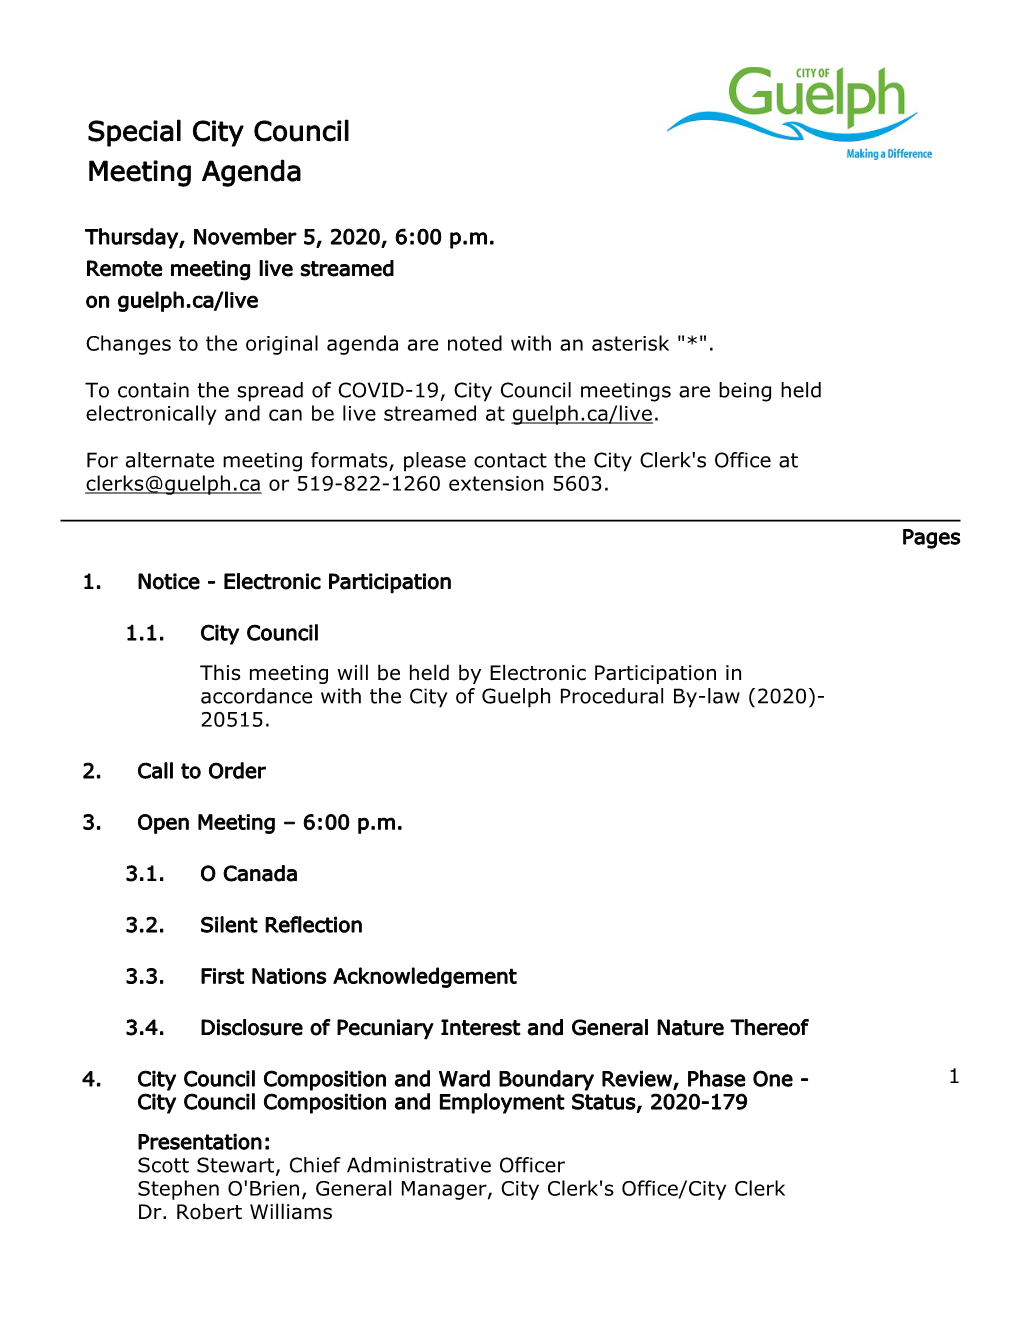 Guelph City Council Agenda Package